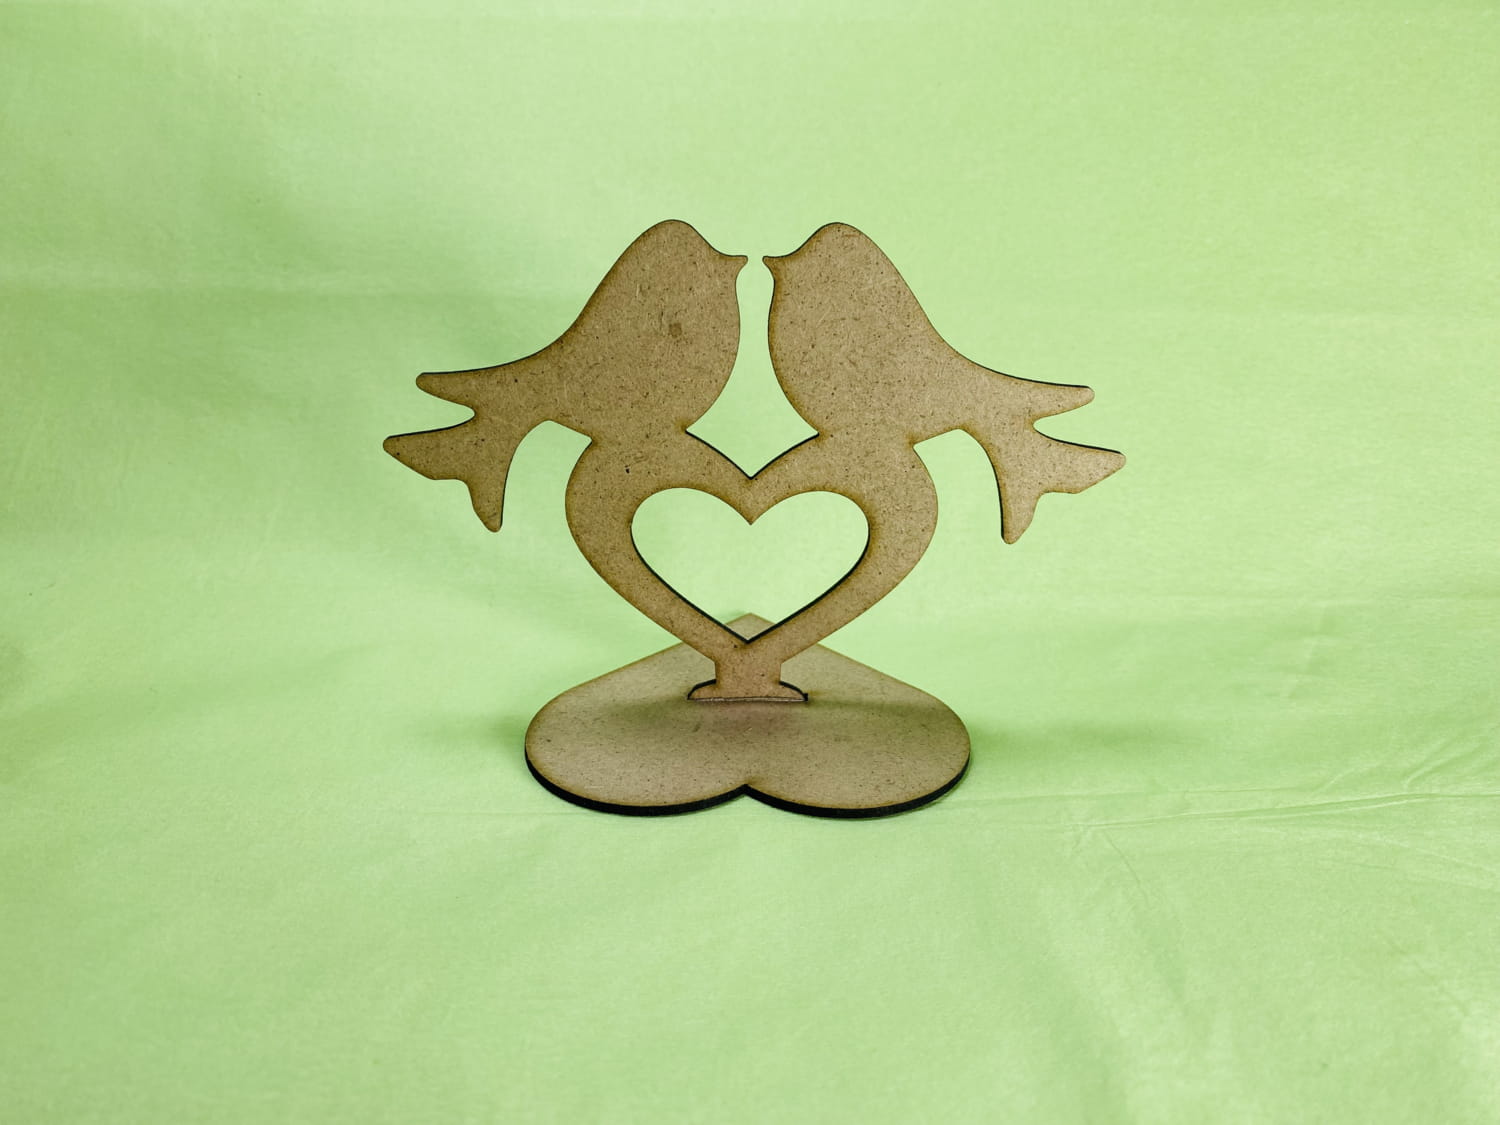 Laser Cut Love Birds On Heart Stand Free Vector